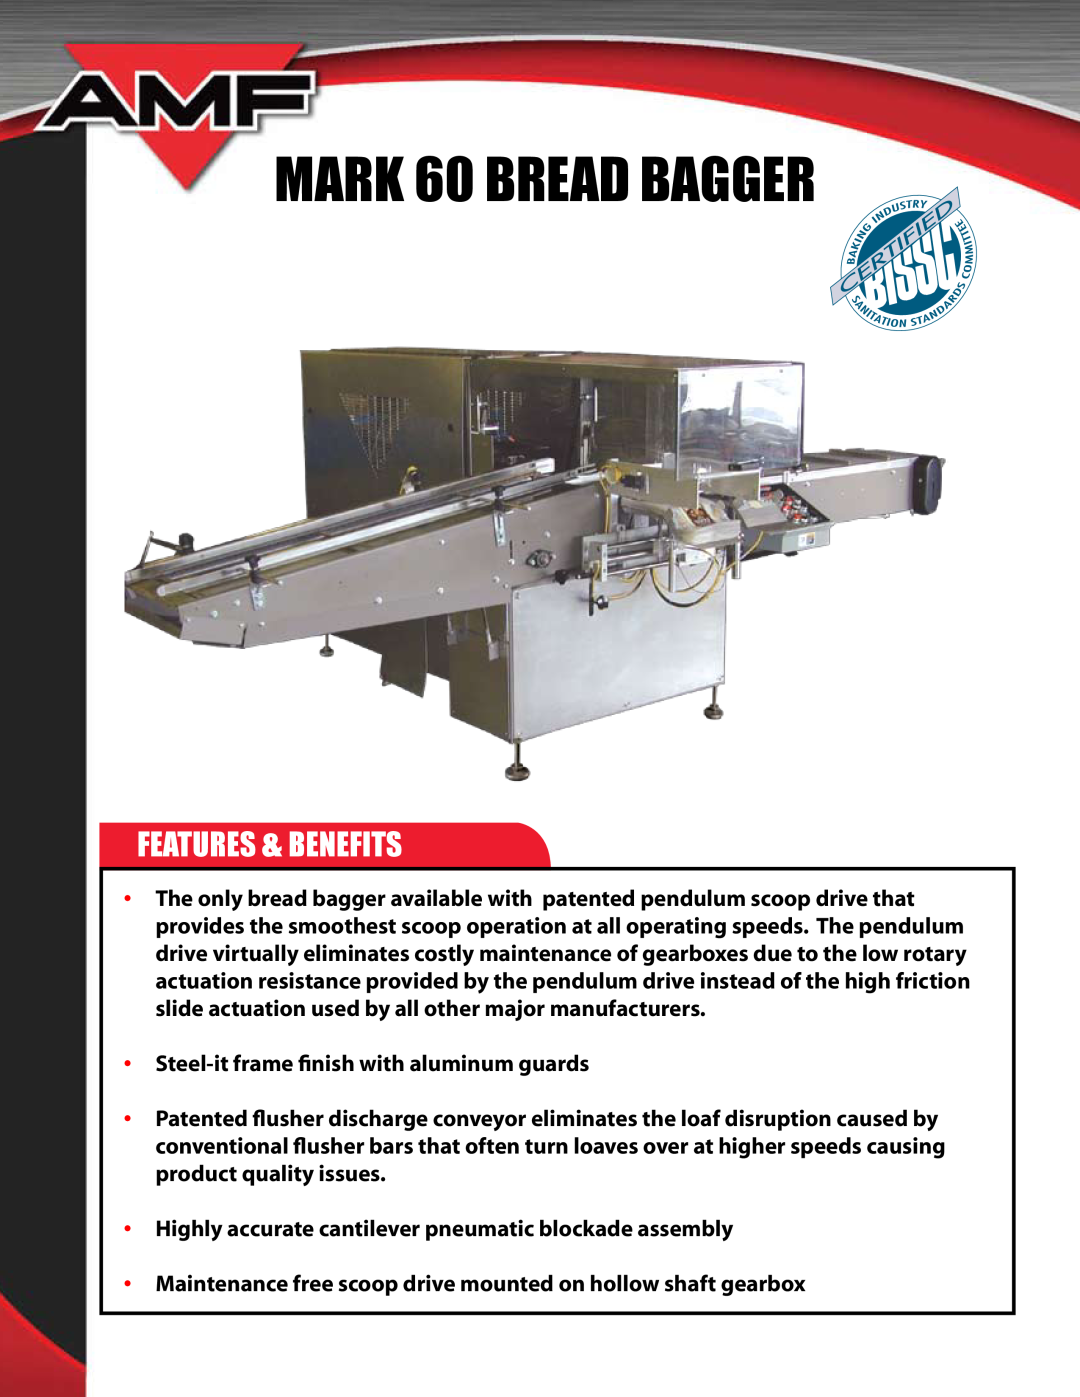 AMF manual Features & Benefits, MARK 60 BREAD BAGGER 